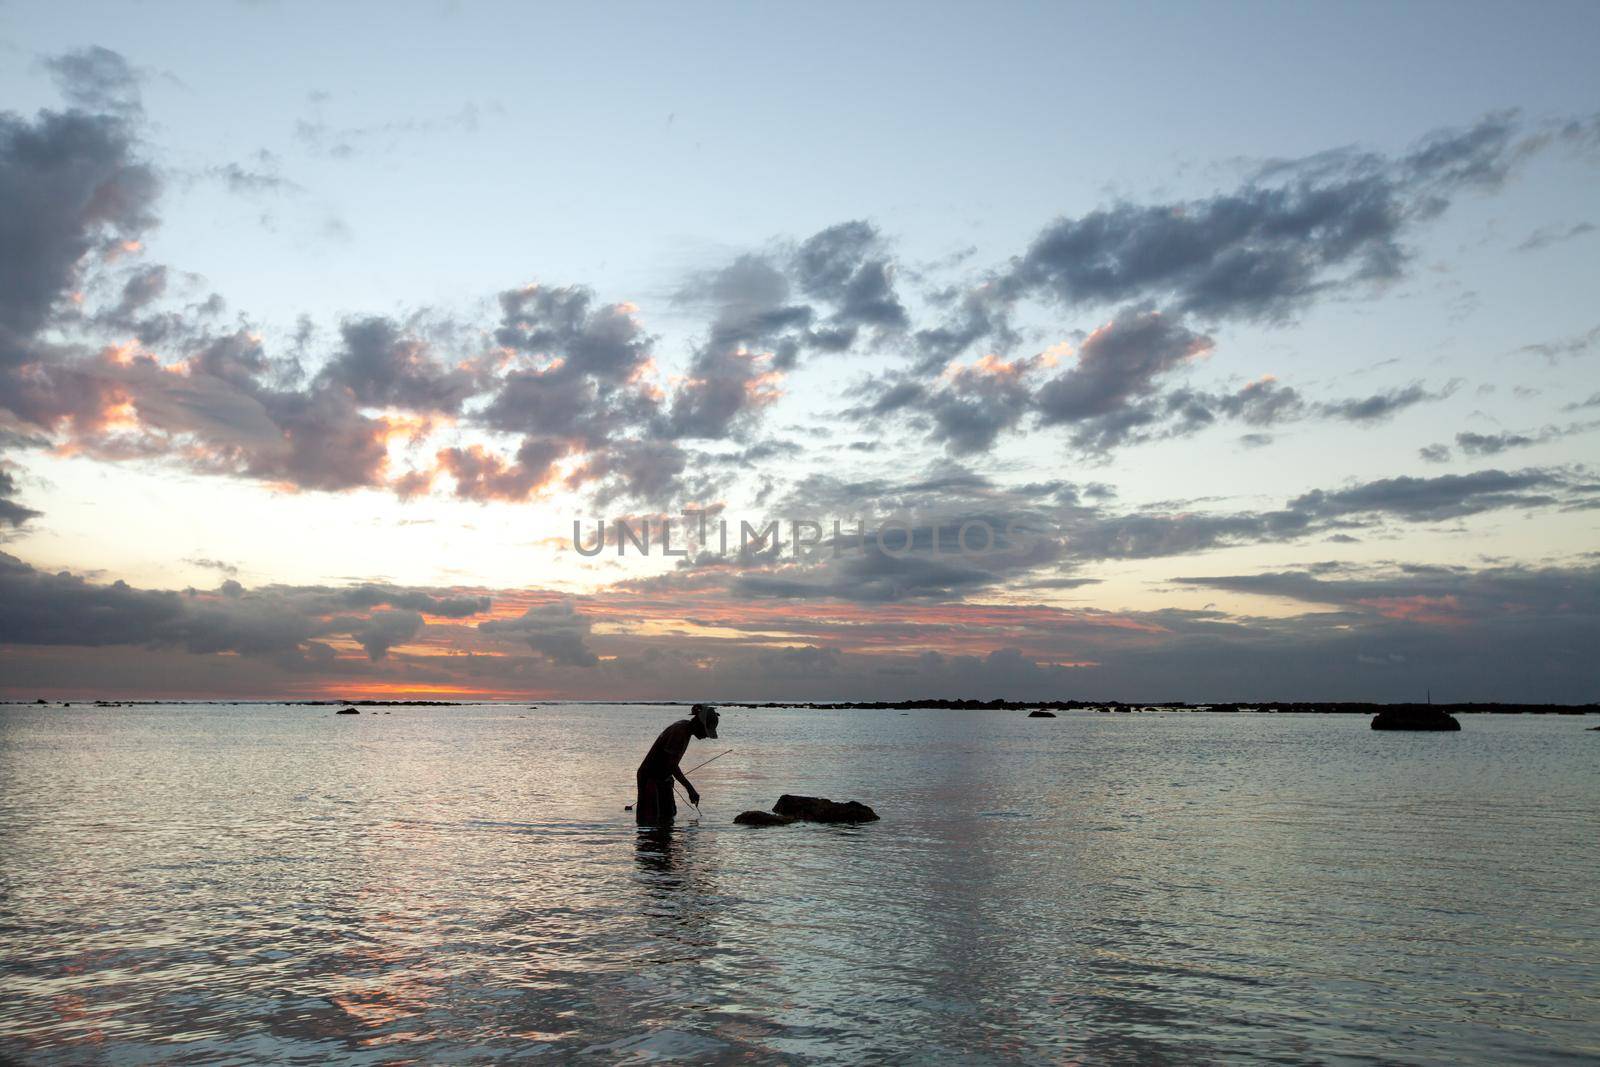 A fisherman catches a fish in the ocean at sunset by StudioPeace